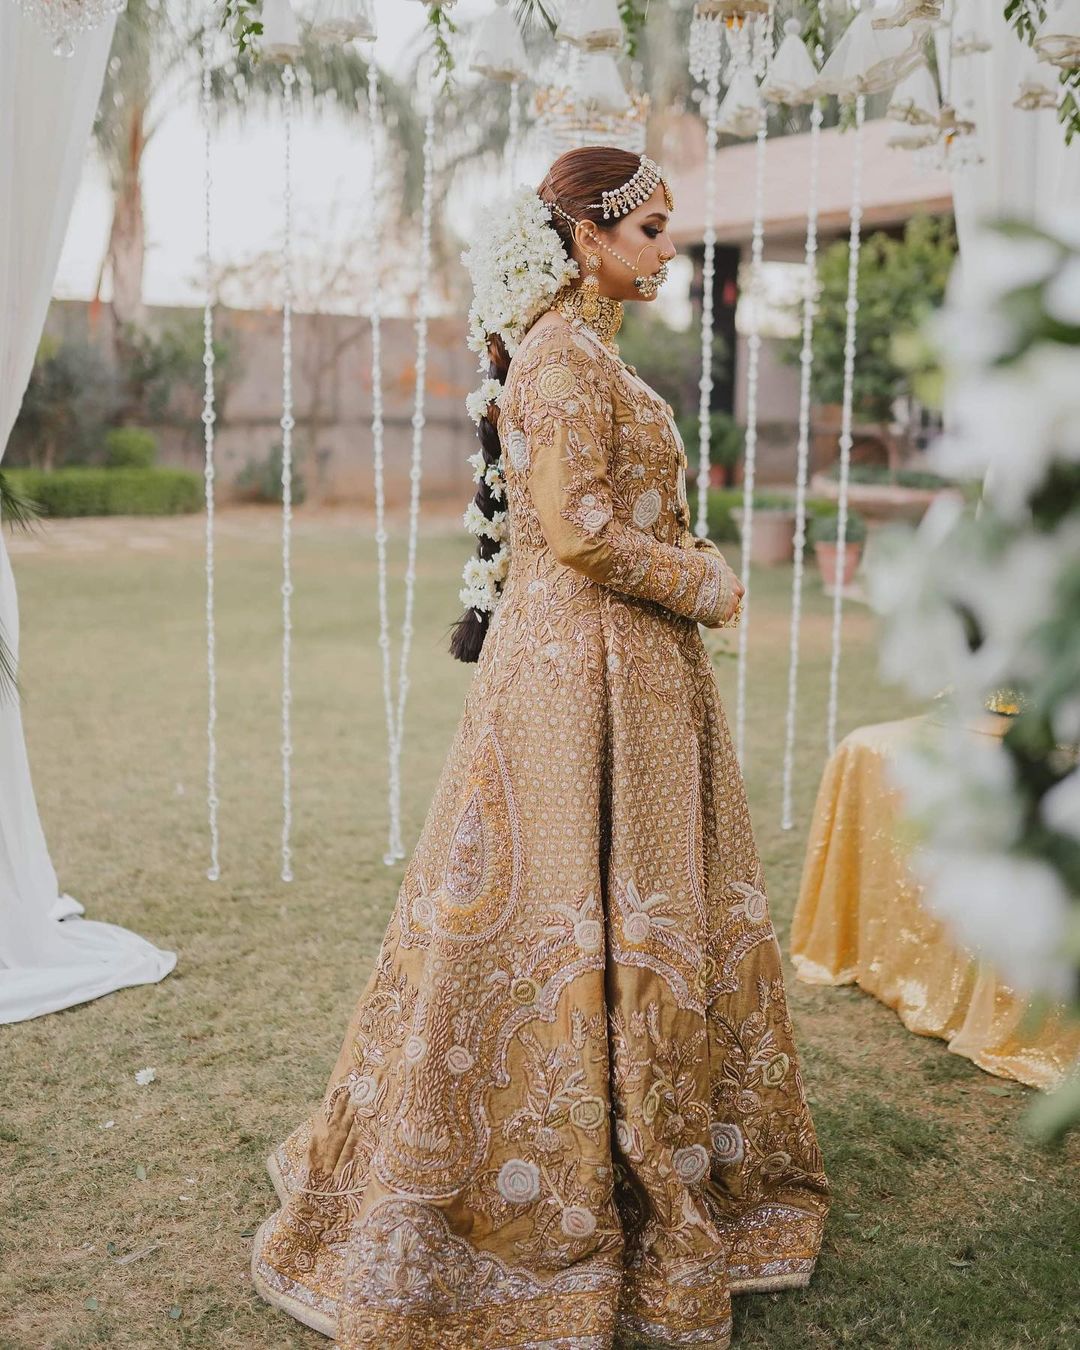 Sonya Hussyn Bukharee is a Mughal Queen in Recent Shoot